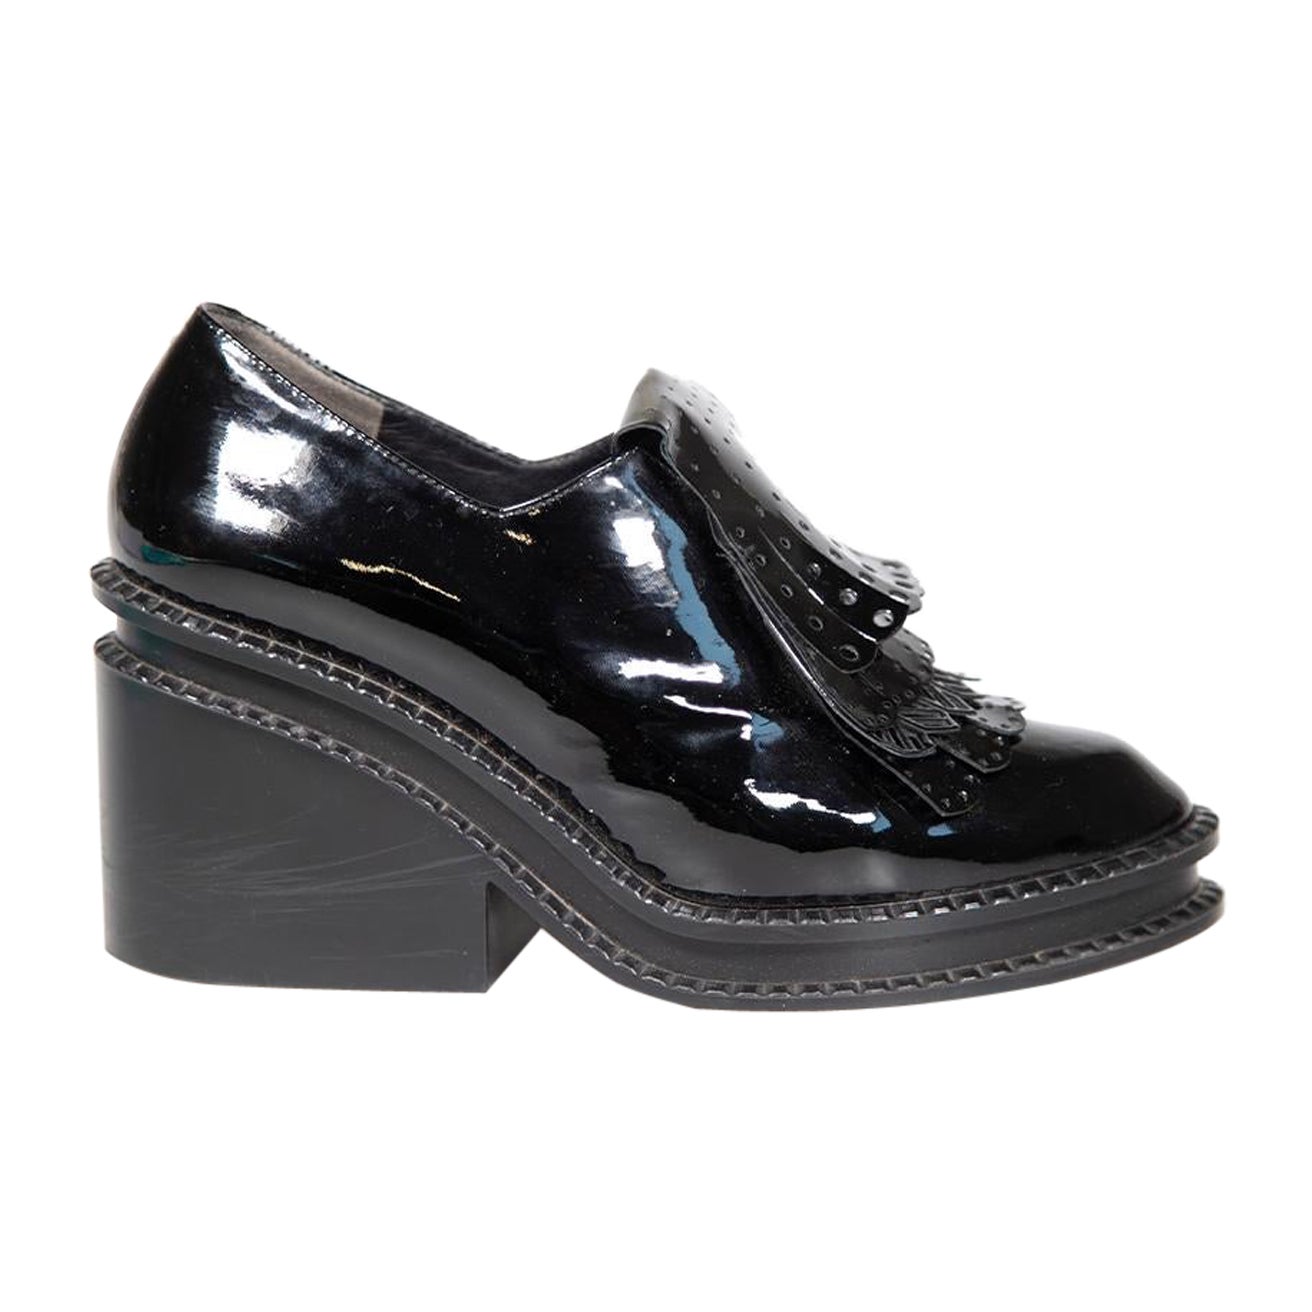 Clergerie Black Patent Leather Fringe Heeled Loafers Size IT 38 For Sale